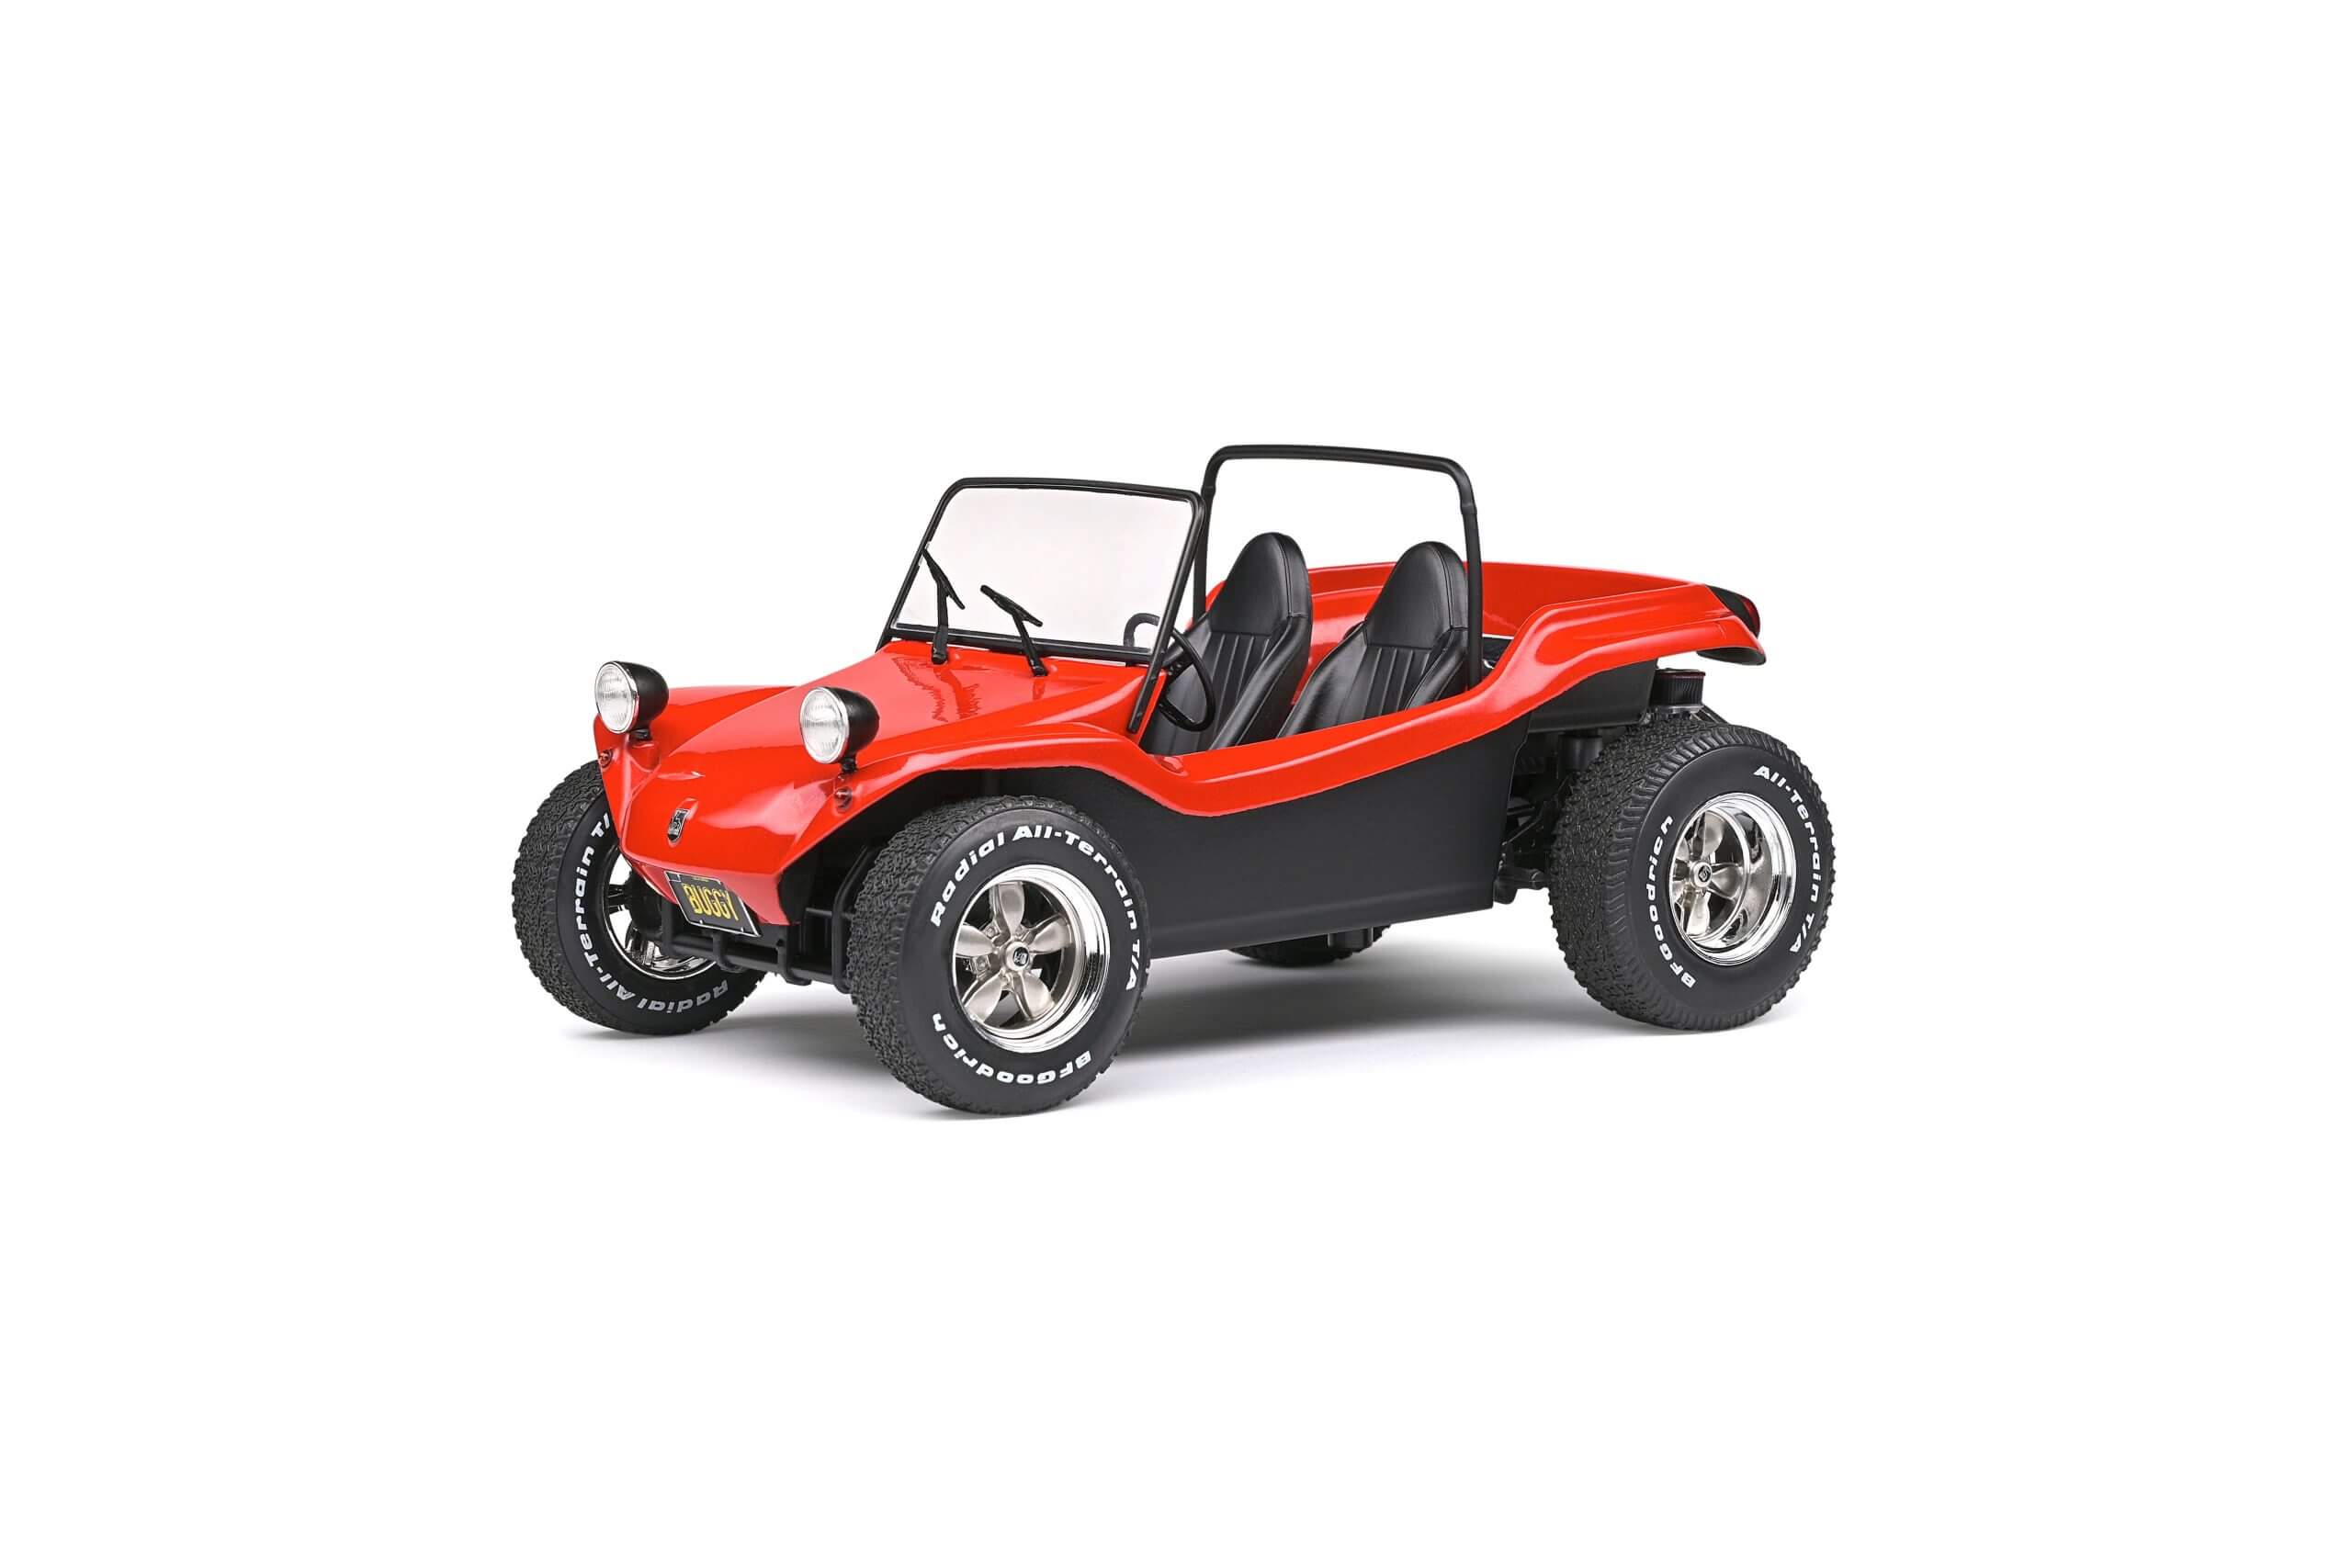 MANX MEYERS BUGGY CONVERTIBLE RED 1968